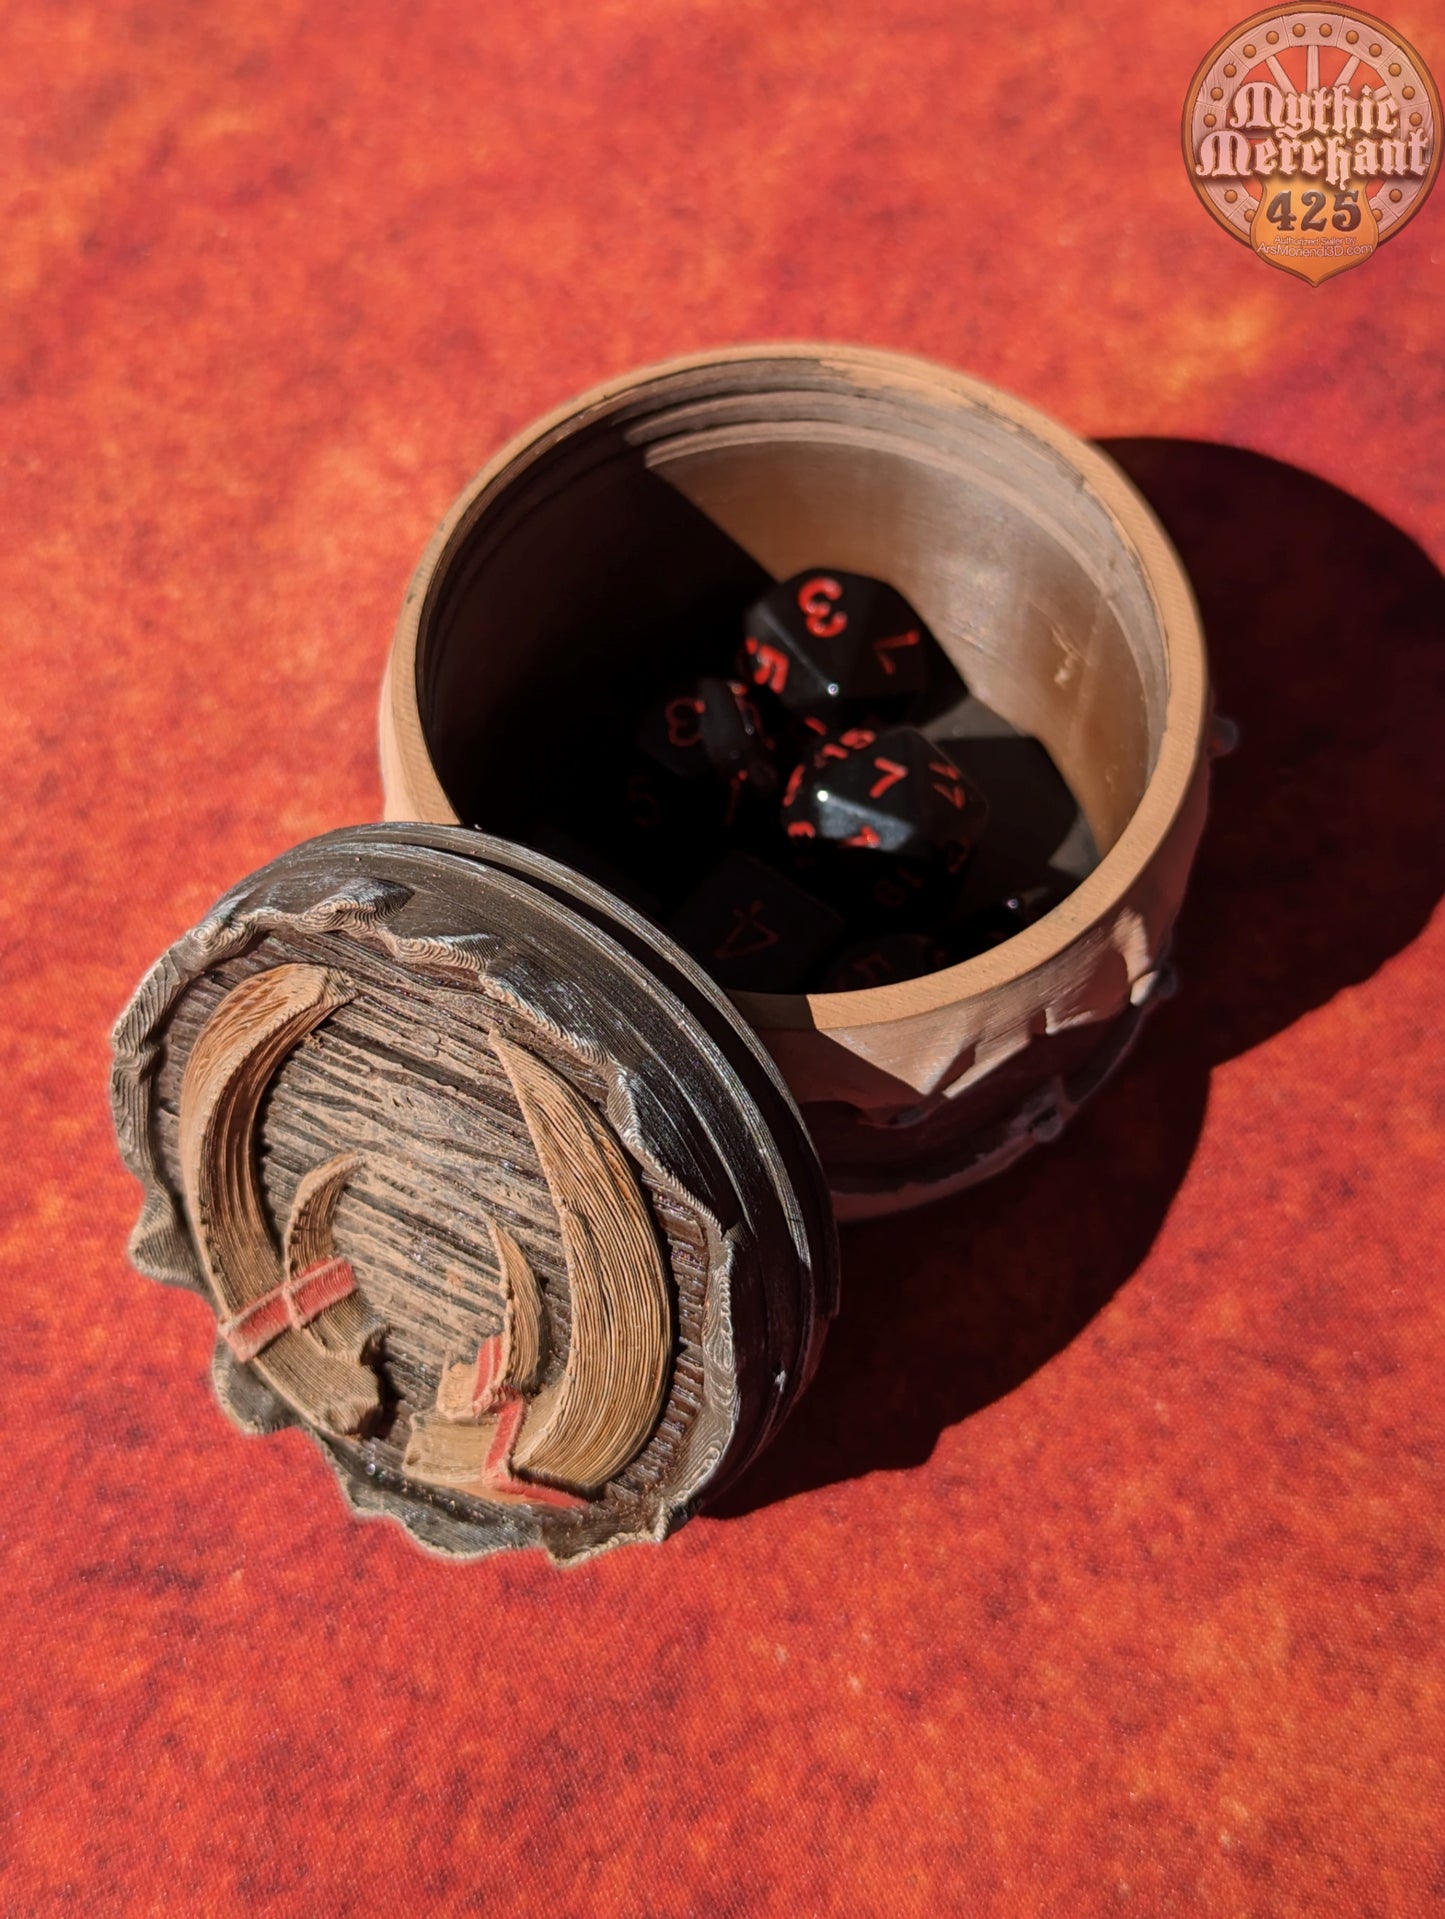 Barbarian Class 3D Printed D20 Dice Vault | Table Coaster & Dice Jail | DnD Player Gift | Mythic Mugs by Ars Moriendi 3D - Unleash the fury!